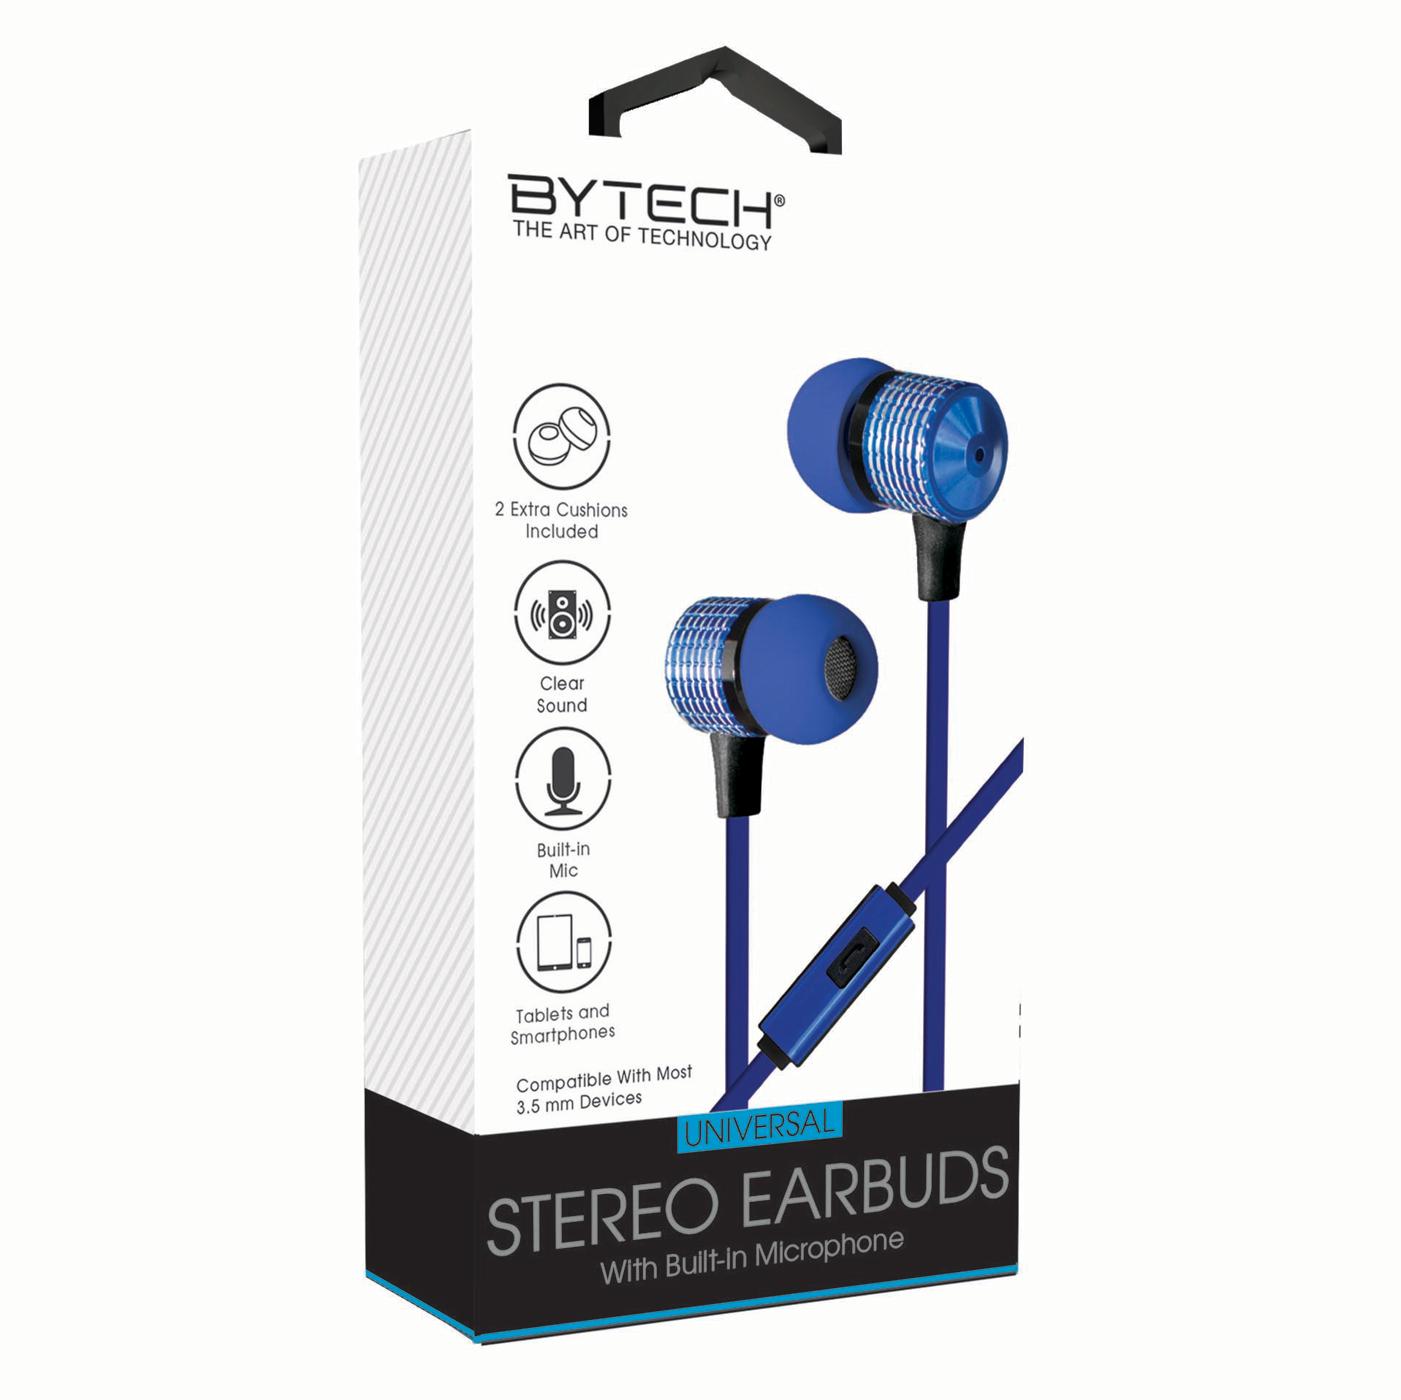 Bytech Metallic Stereo Earbuds; image 2 of 2